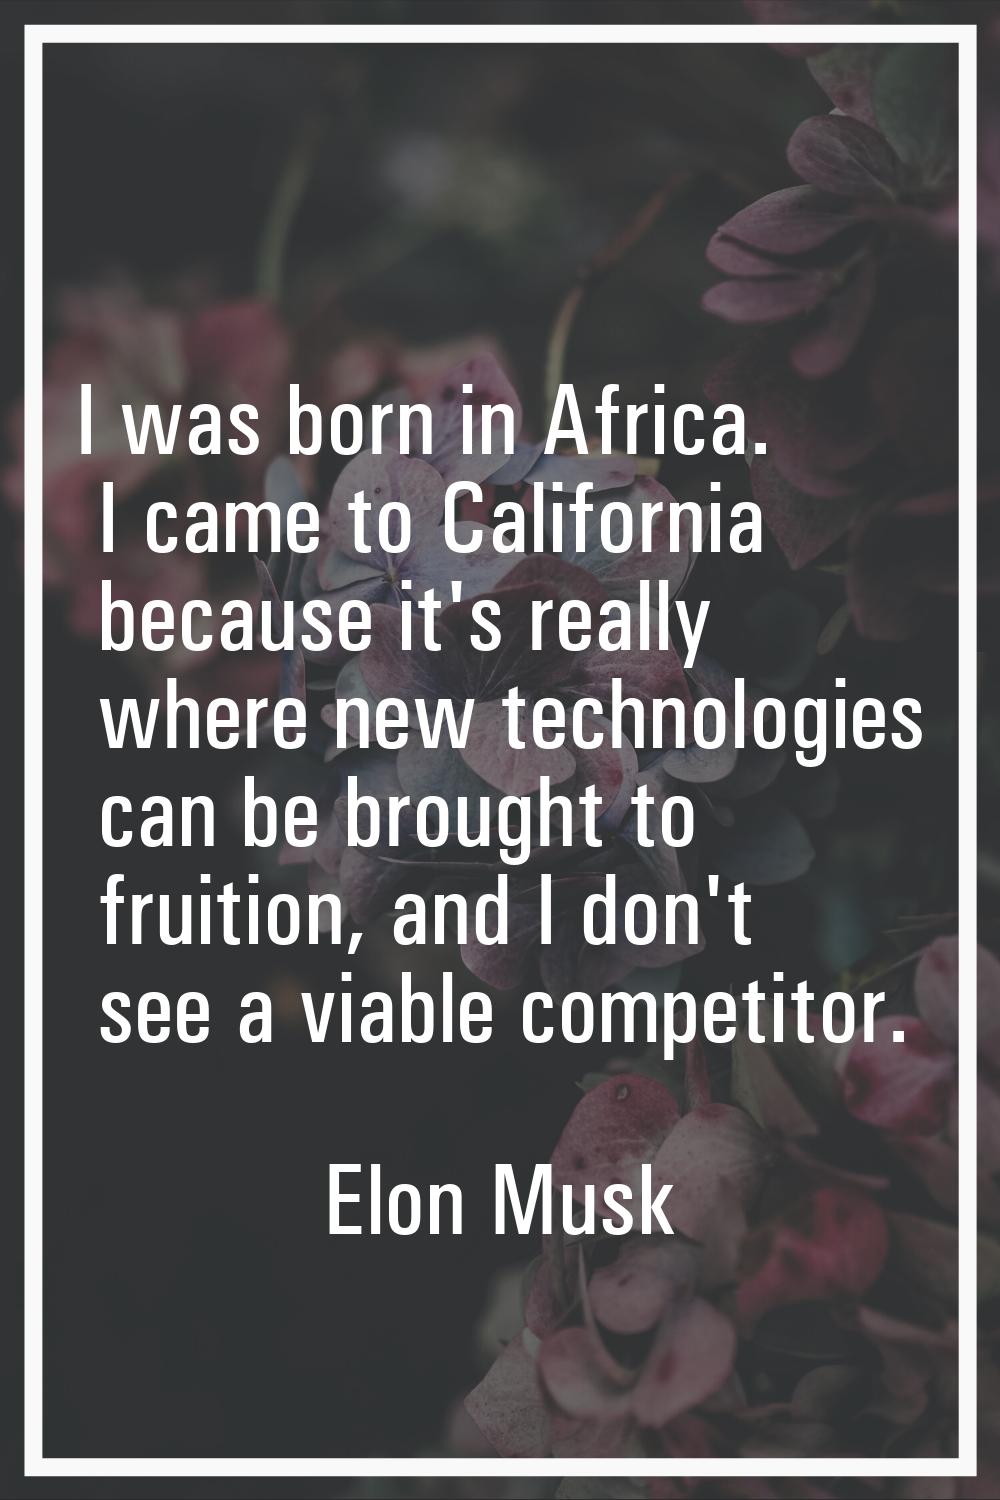 I was born in Africa. I came to California because it's really where new technologies can be brough